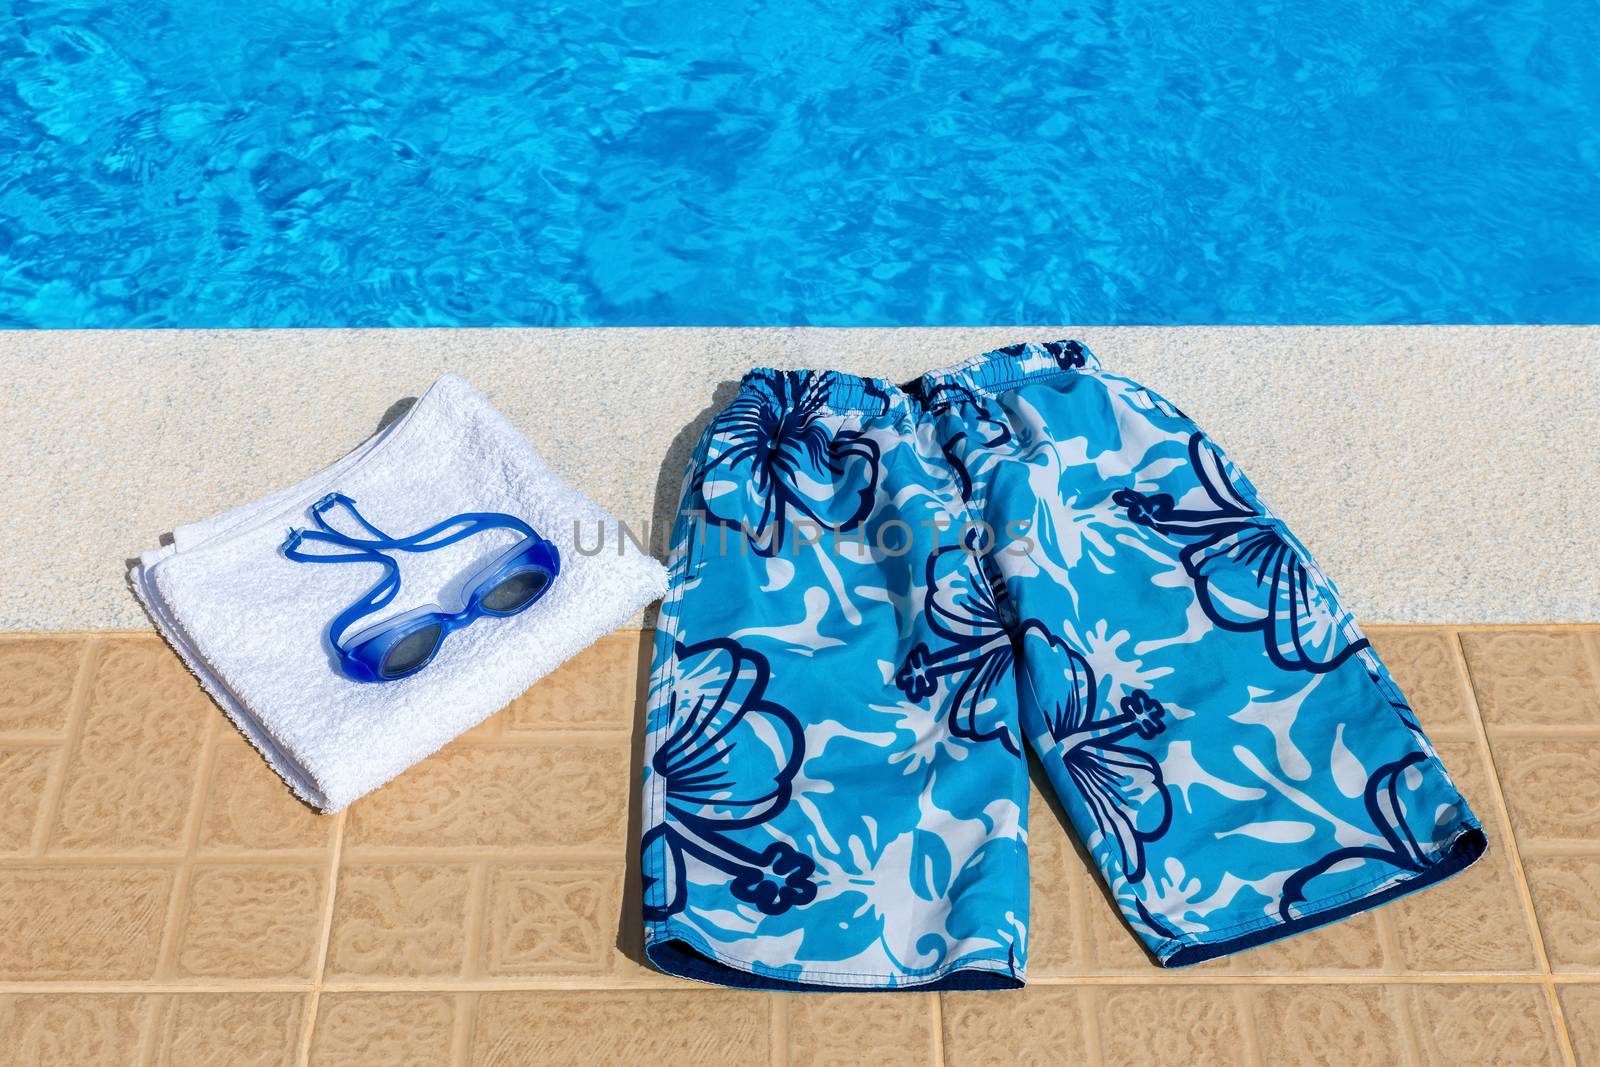 Swimming trunks goggles and towel at pool by BenSchonewille